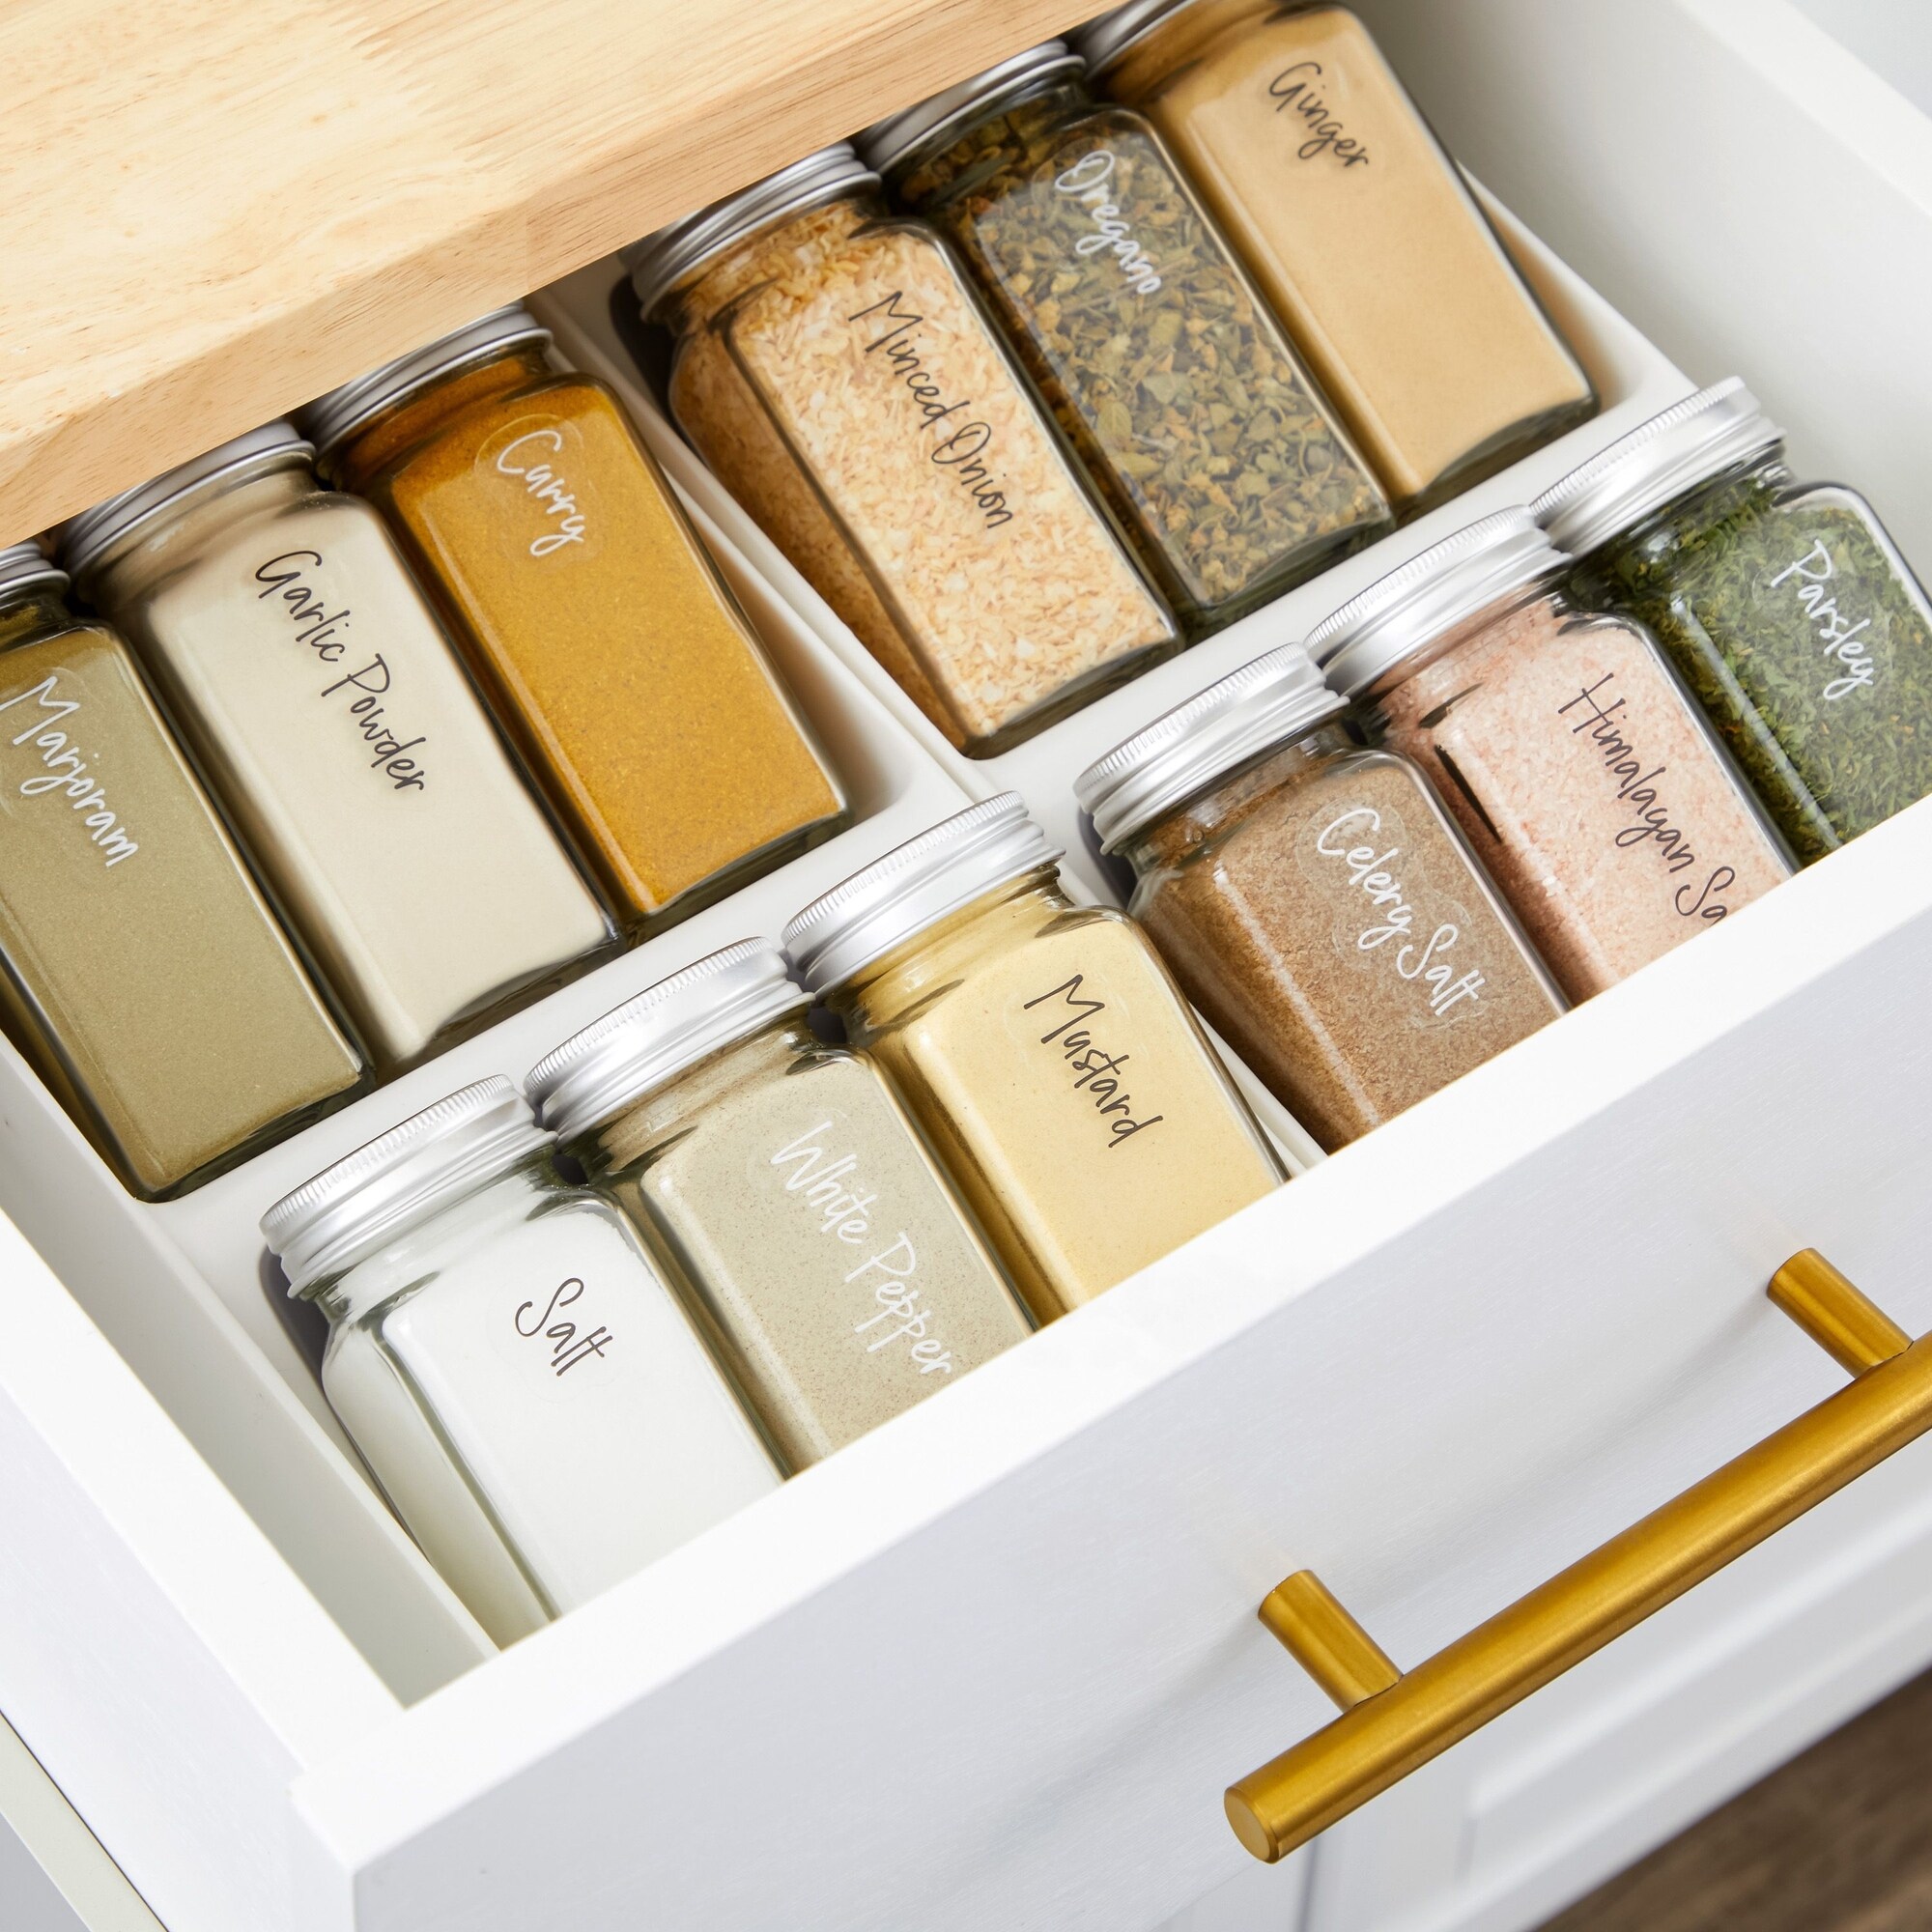 https://ak1.ostkcdn.com/images/products/is/images/direct/90ef49f00082d9b2f96365a3f6d8e6986e555b54/Talented-Kitchen-Spice-Drawer-Organizer-with-Jars-and-Labels-with-18-Empty-4-oz-Spice-Bottles%2C-416-Seasoning-Label-%285.9-x-15-In%29.jpg